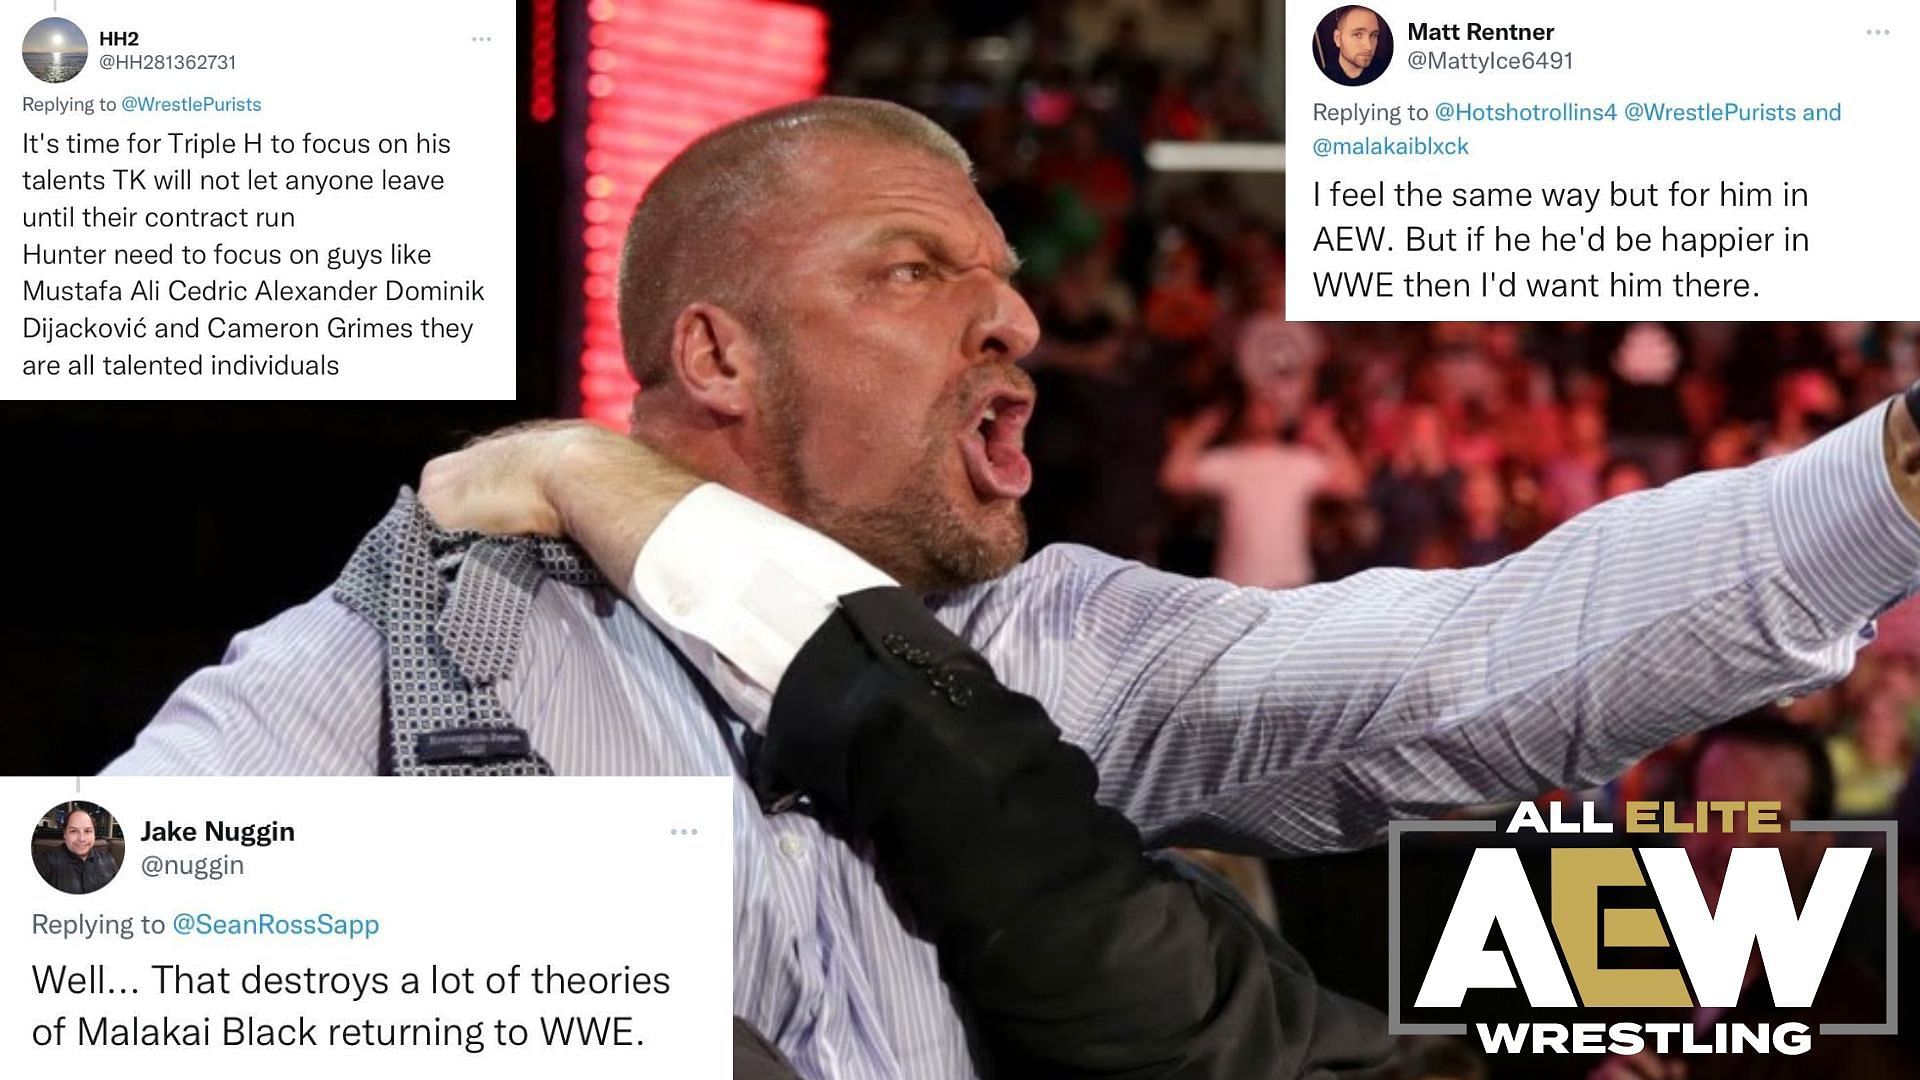 Twitter has had their say on the recent situation regarding AEW contracts